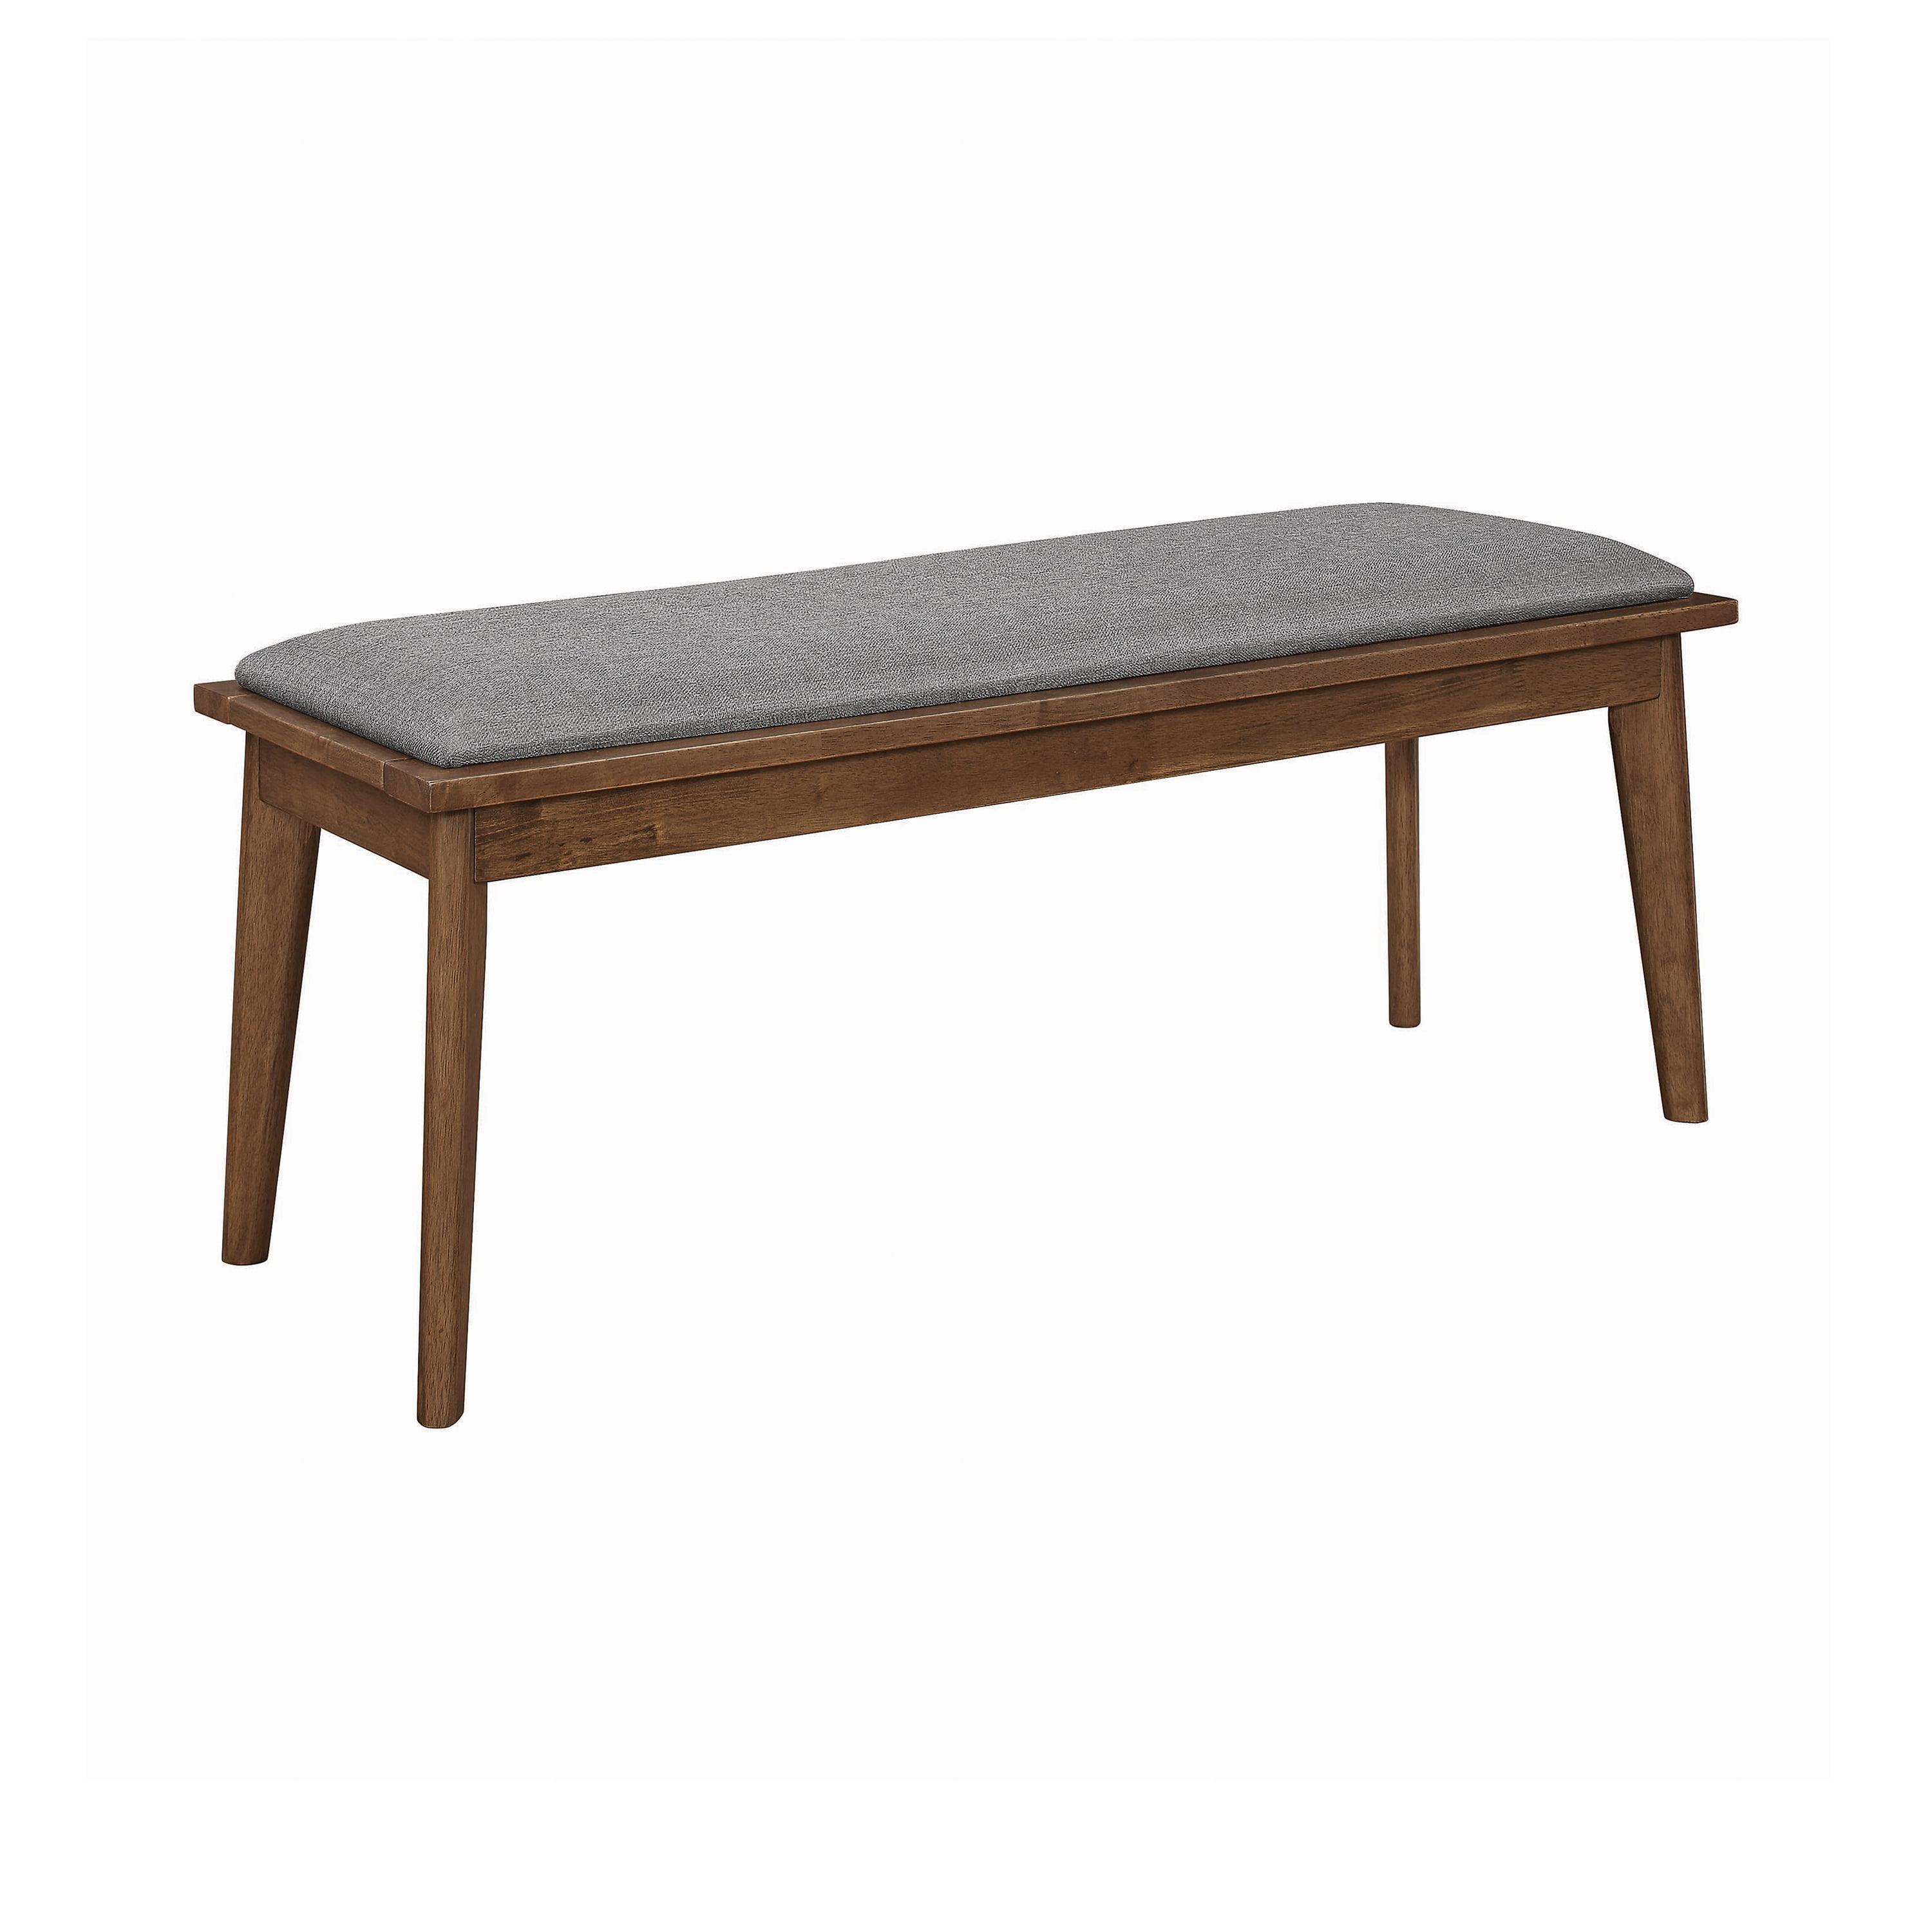 Retro-Inspired Gray Upholstered Dining Bench with Natural Walnut Legs